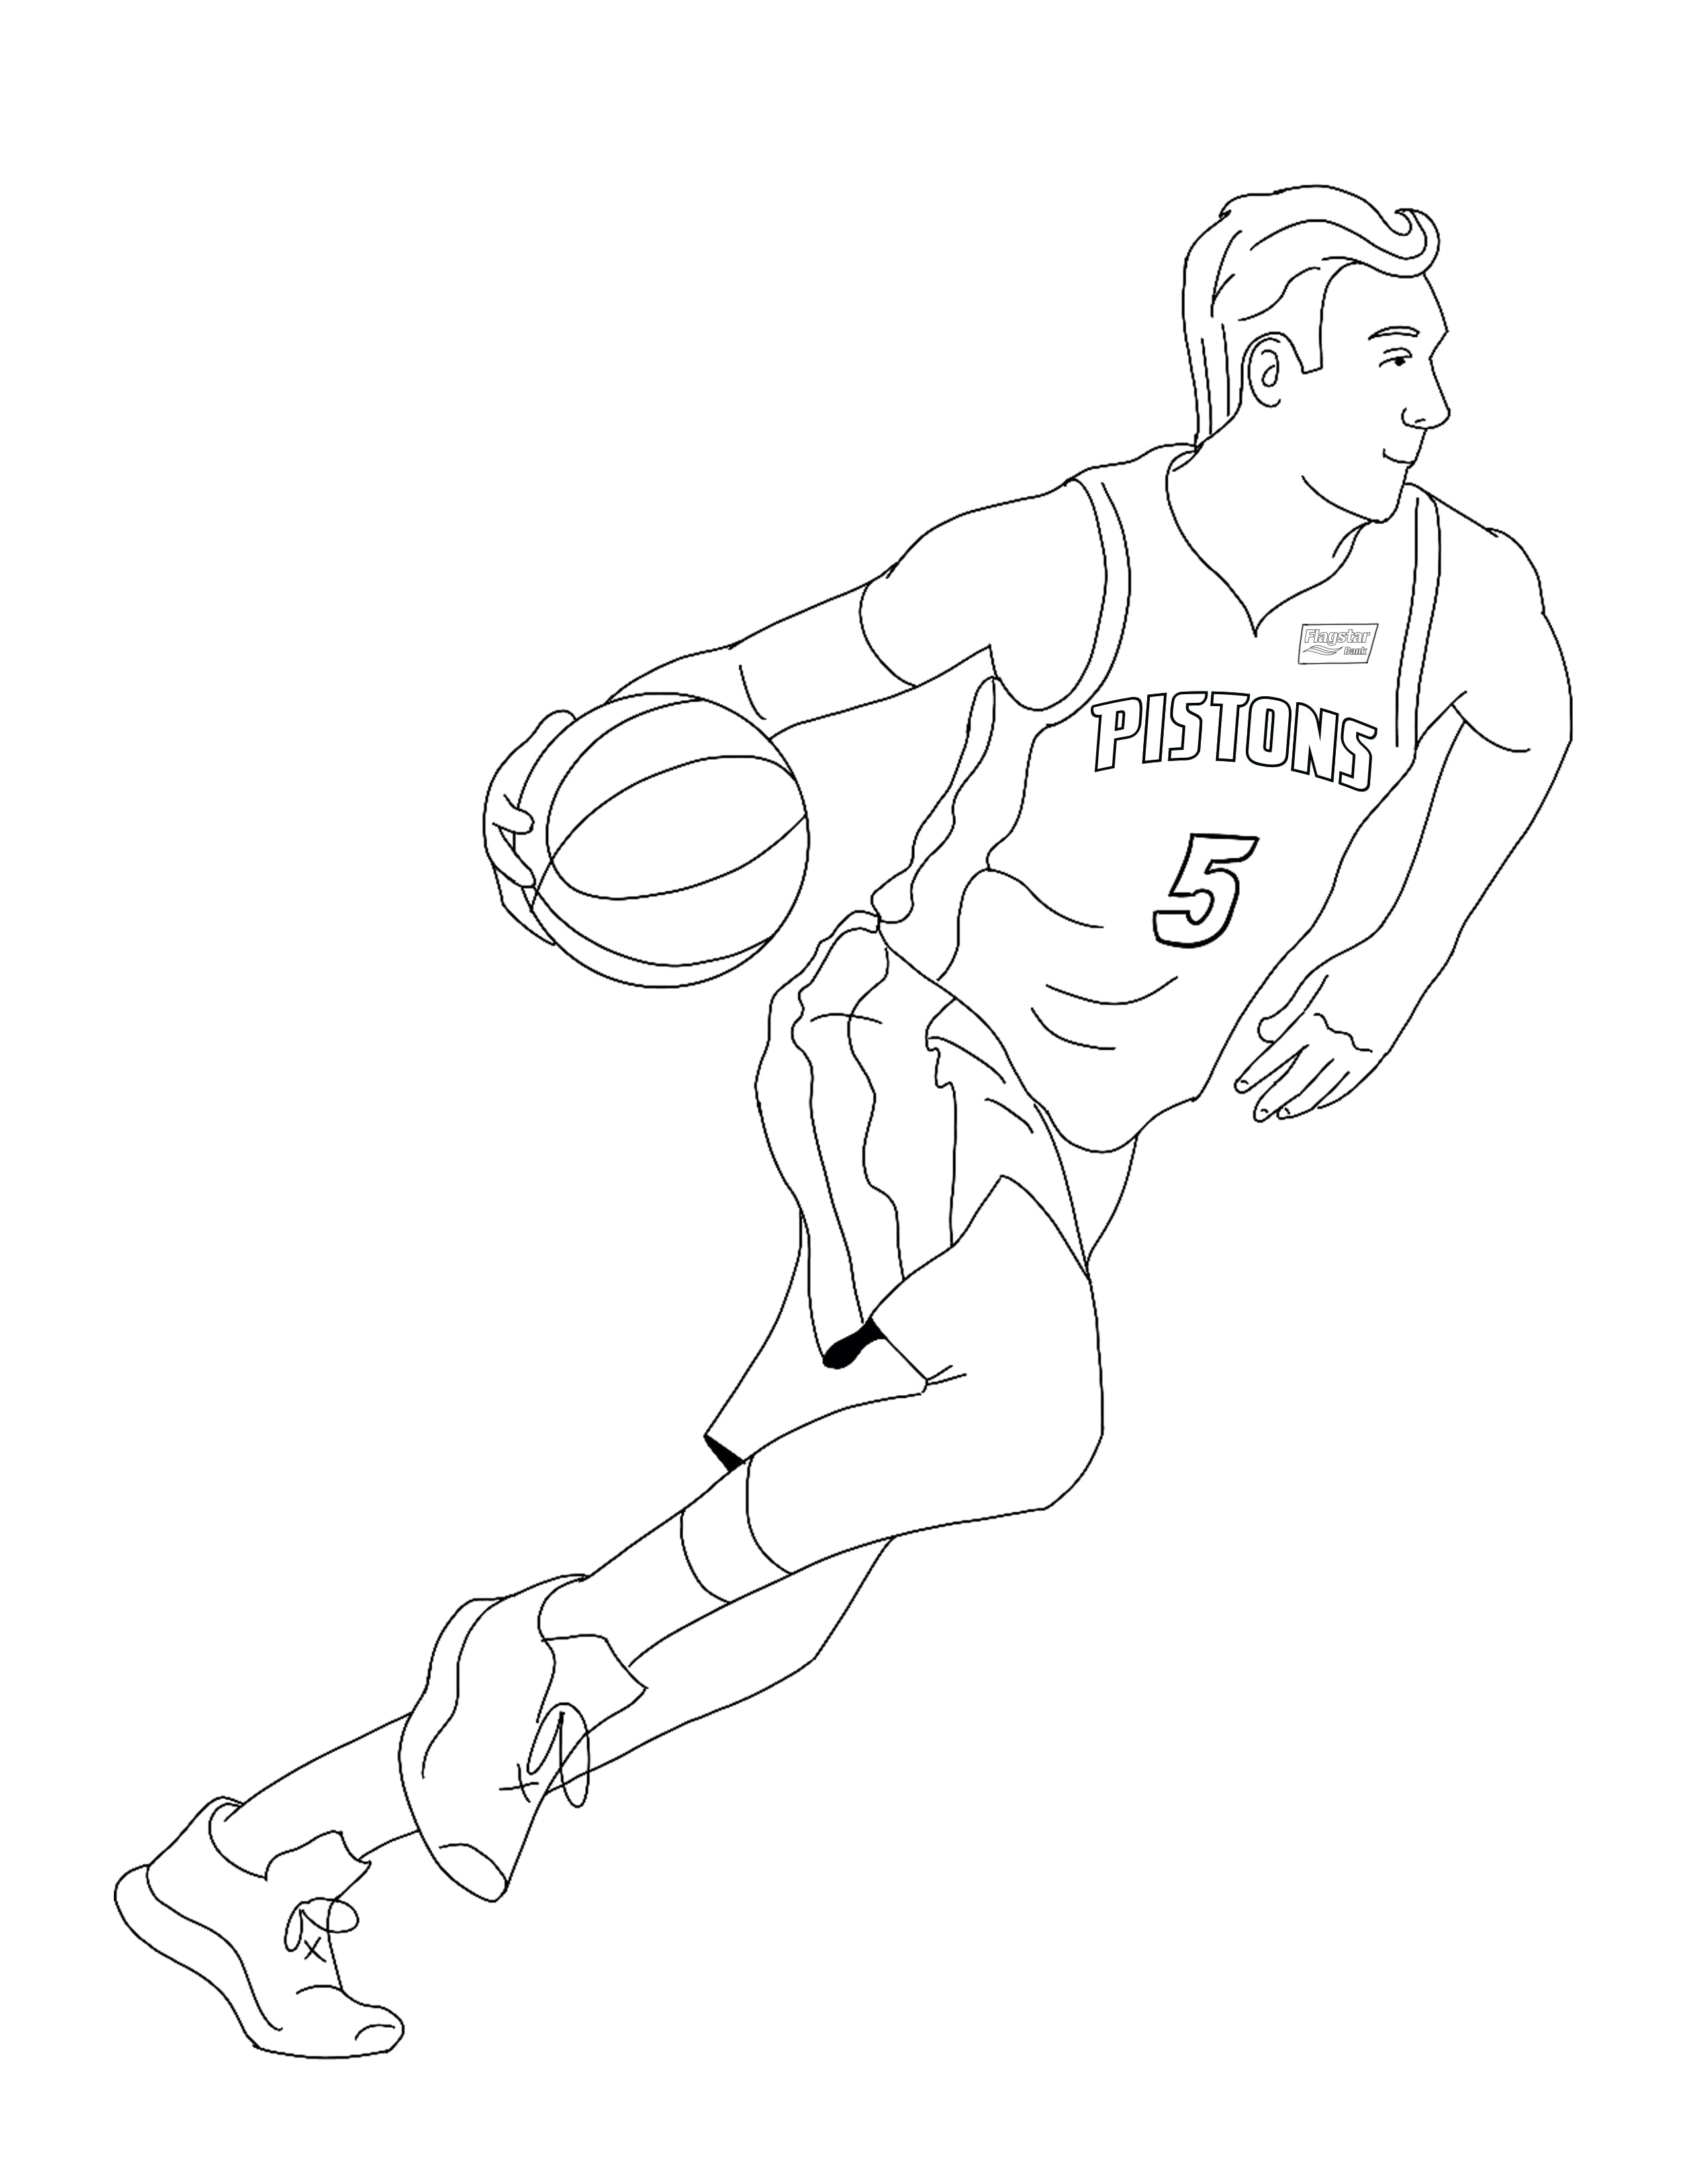 Coloring pages photo gallery